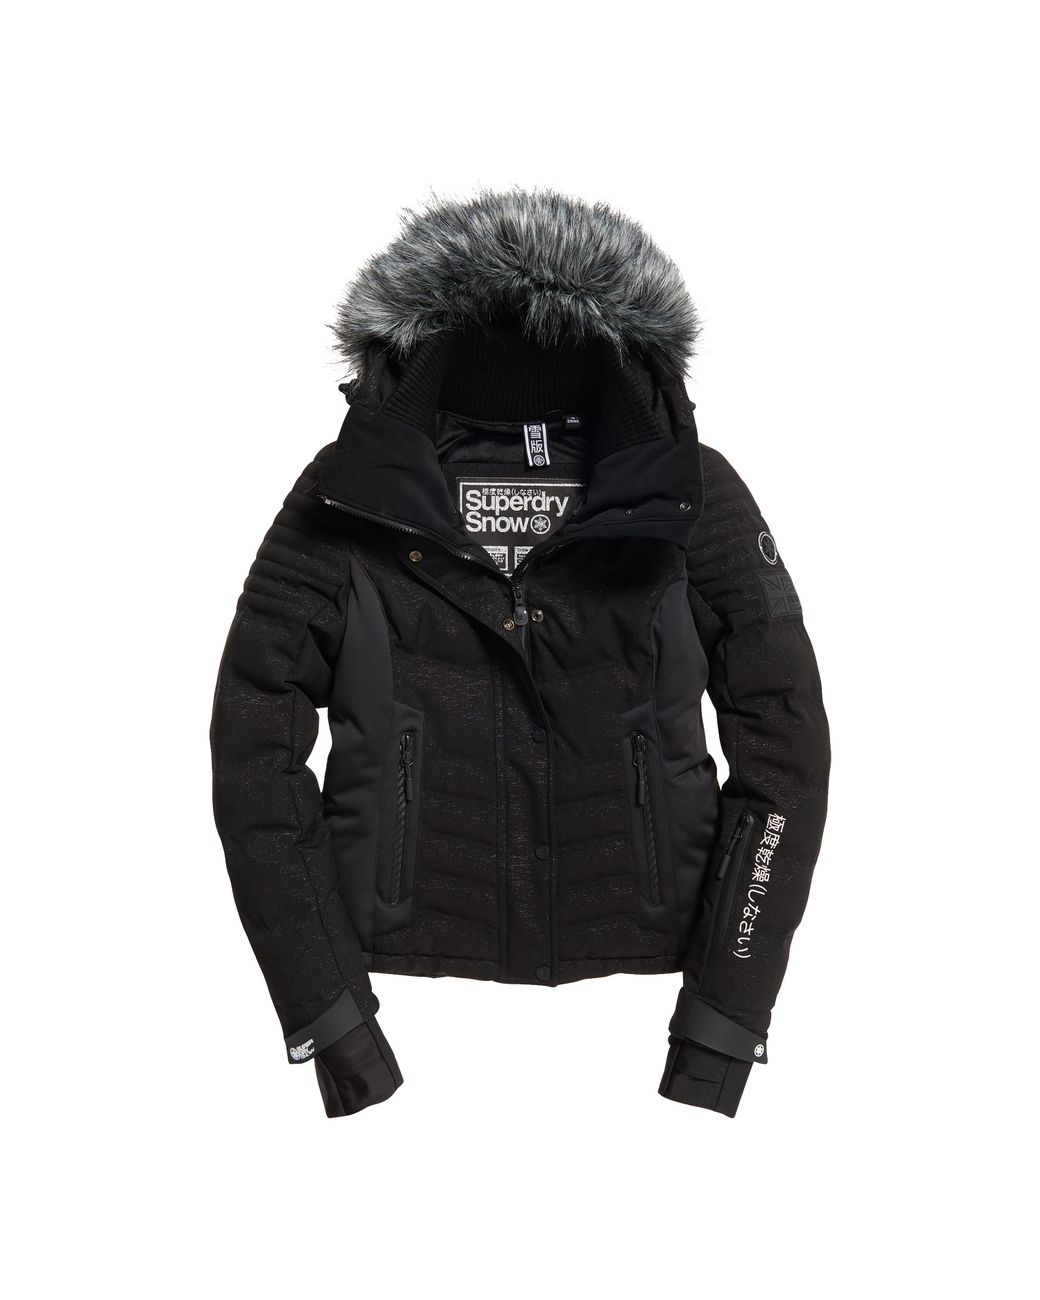 Superdry Luxe Snow Puffer Style Jacket in Black - Lyst